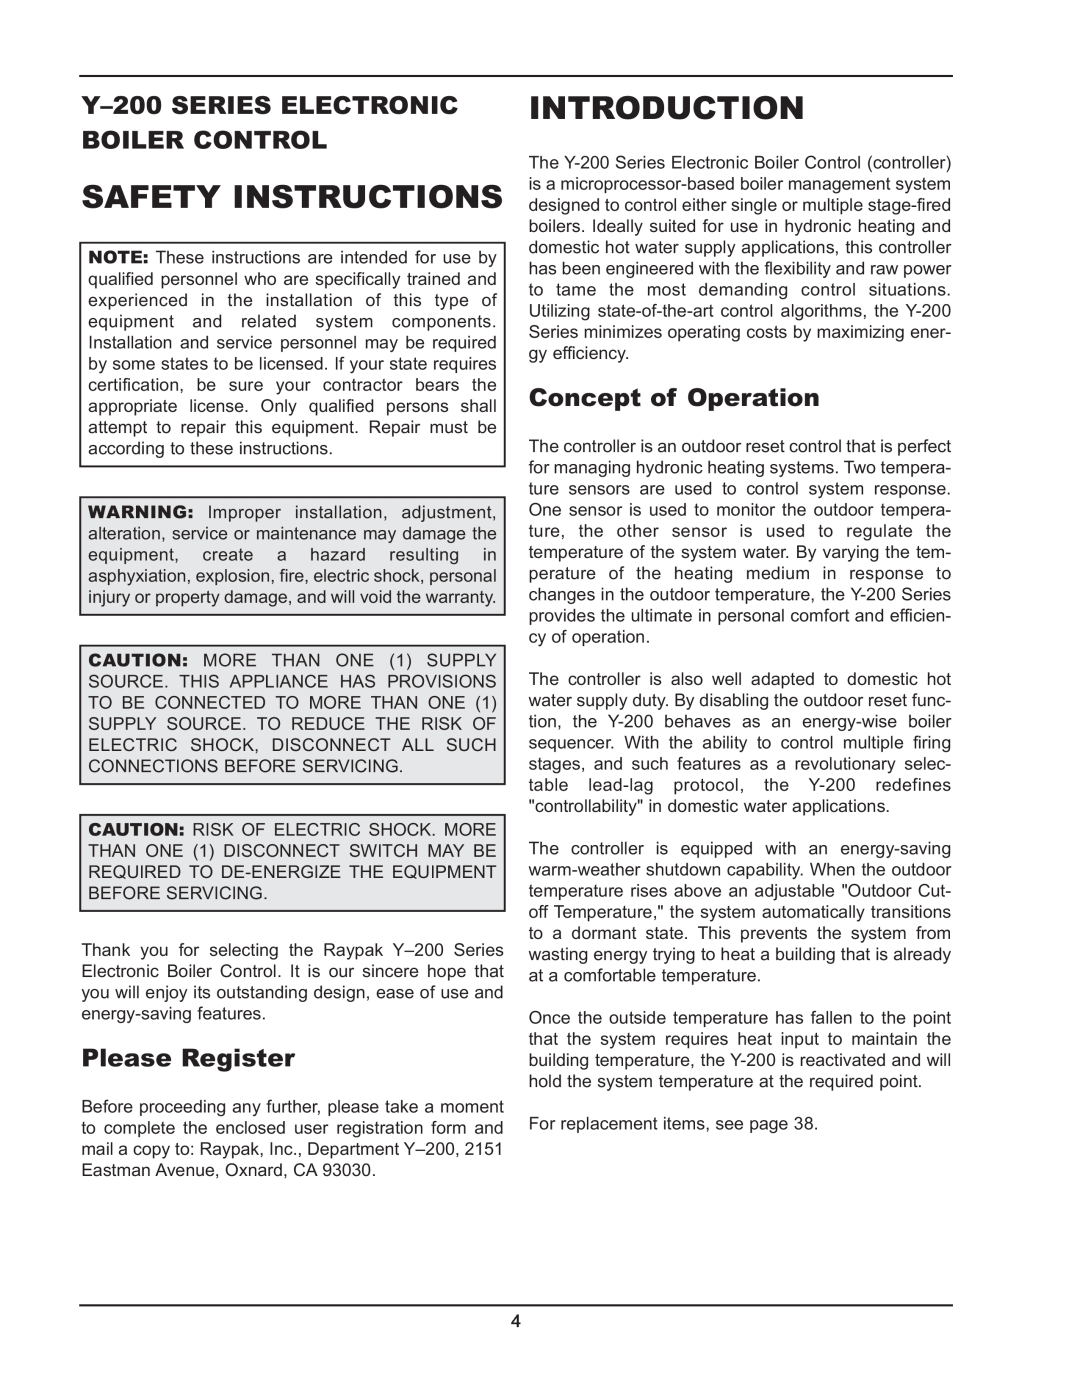 Raypak Y-200 manual Safety Instructions, Introduction, Please Register, Concept of Operation 